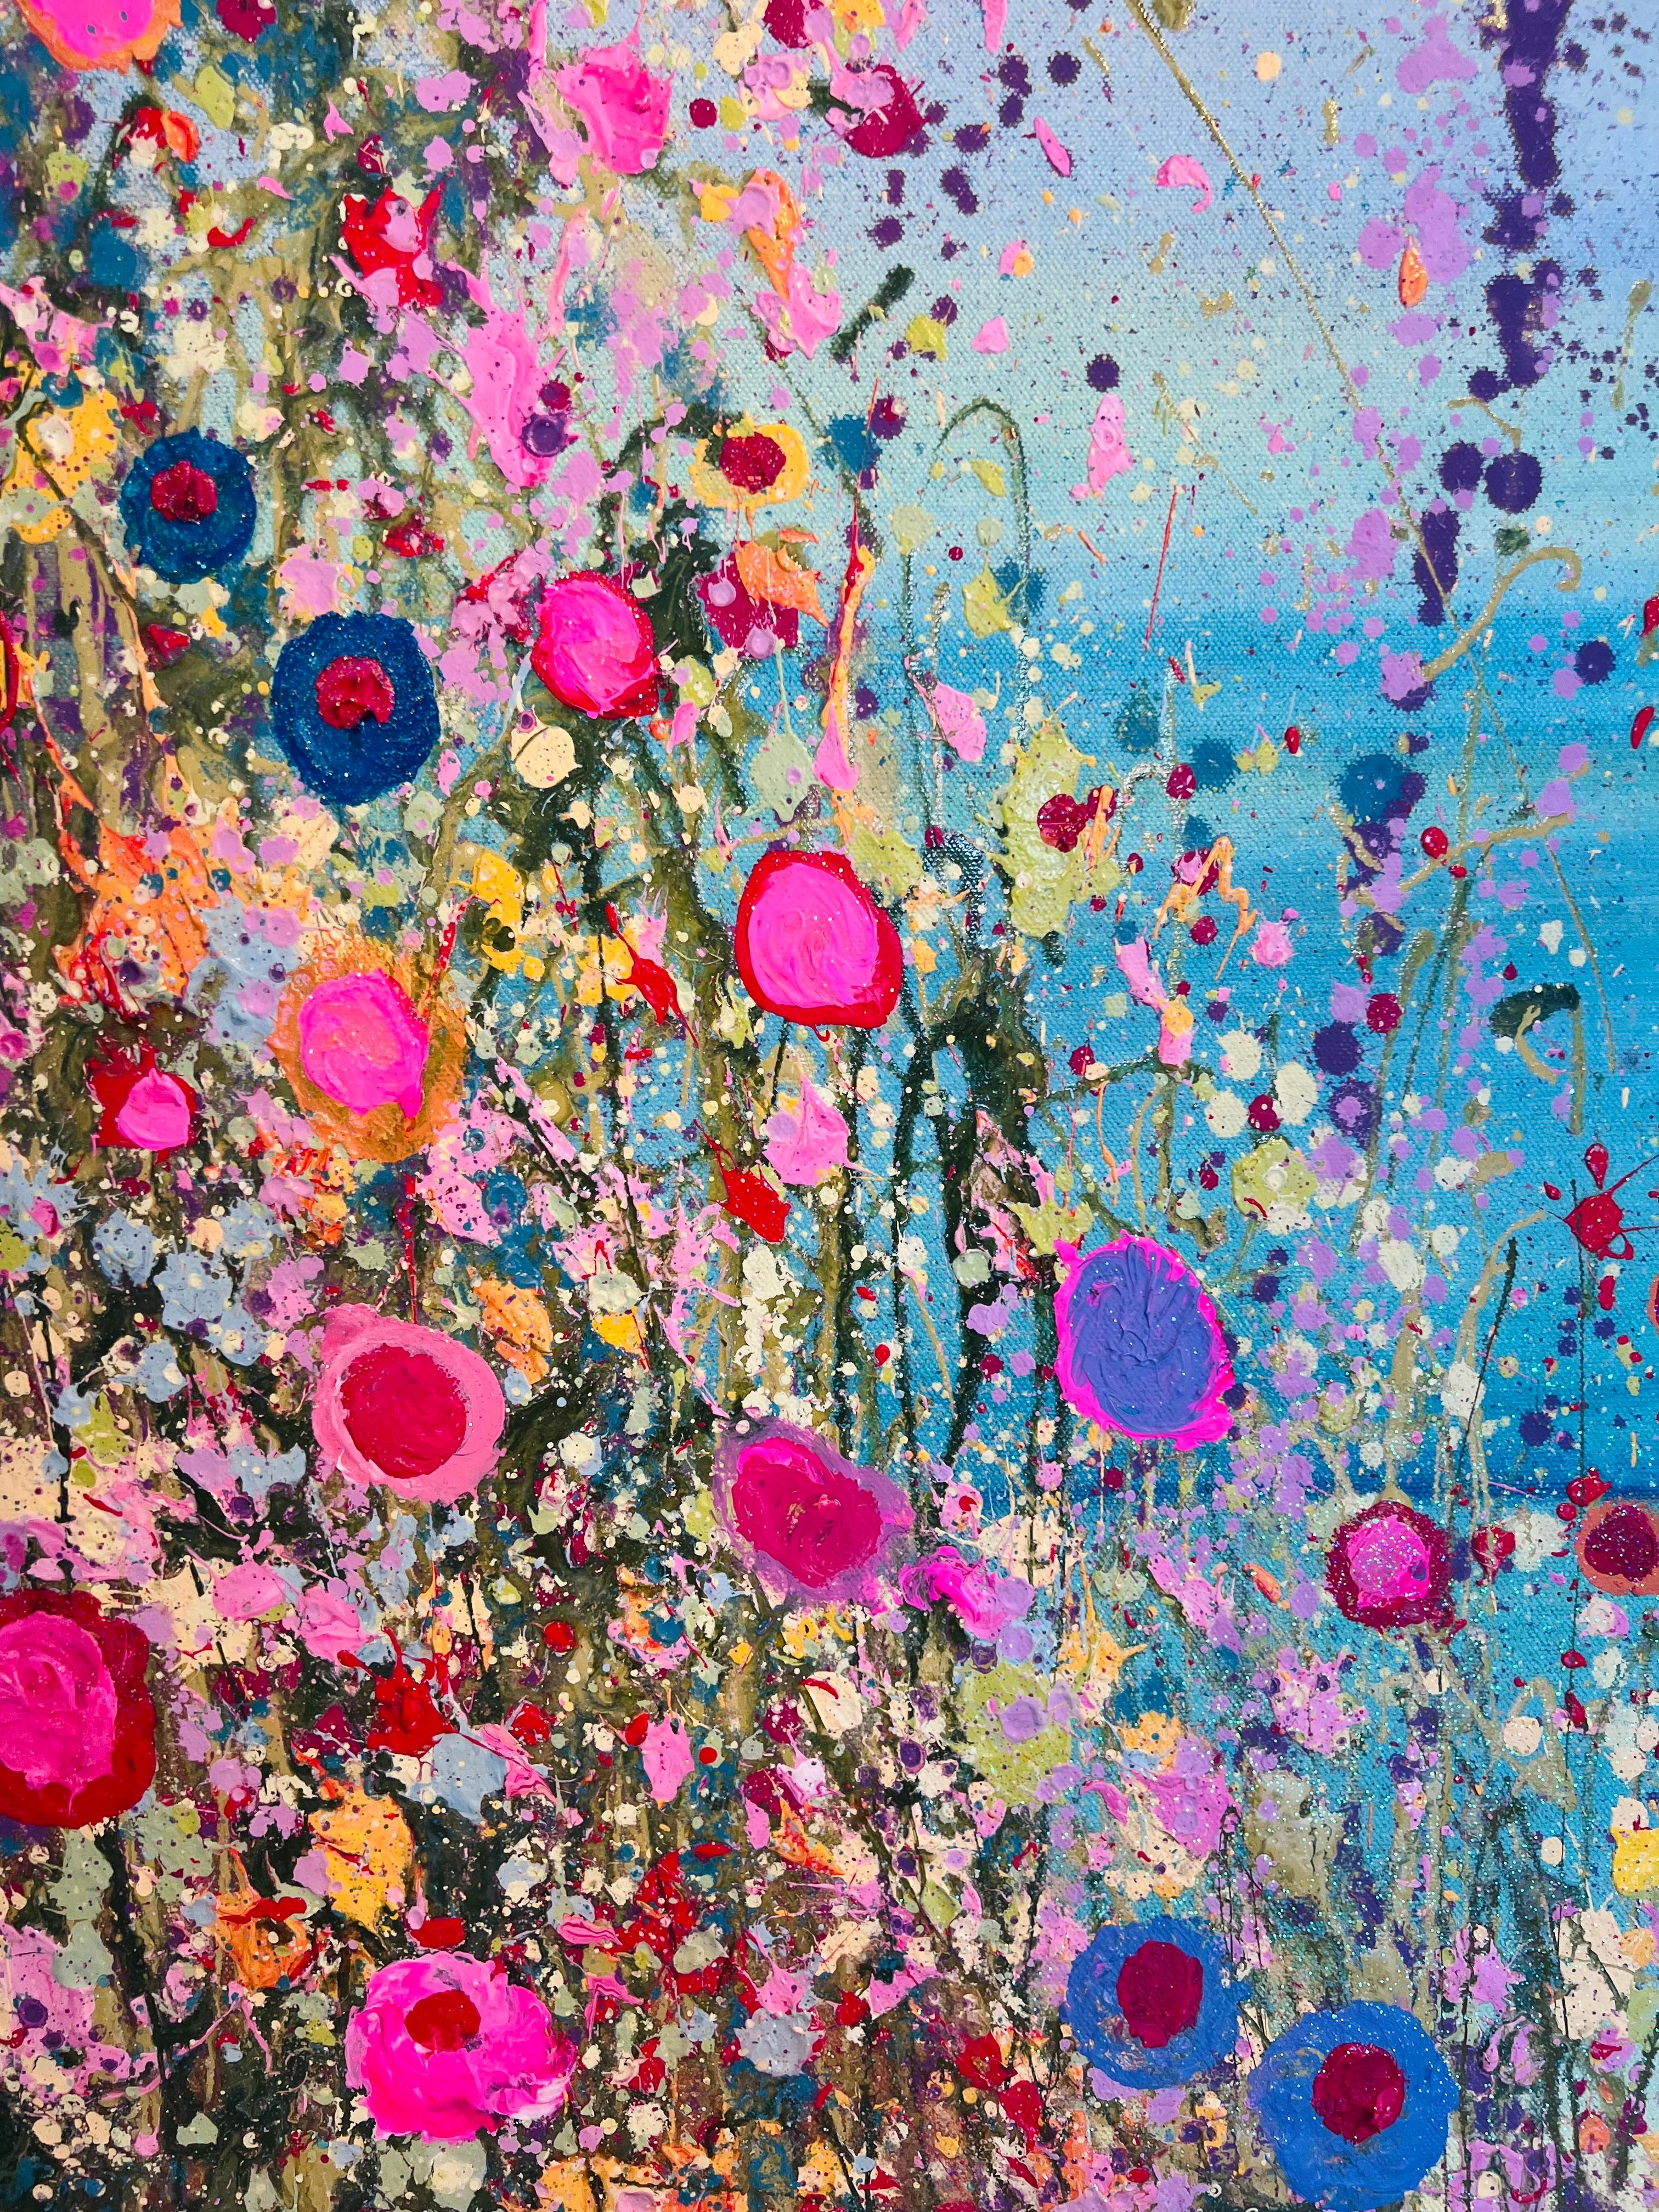 Let The Magic In - original abstract oil floral scape painting Contemporary art - Gray Landscape Painting by Yvonne Coomber